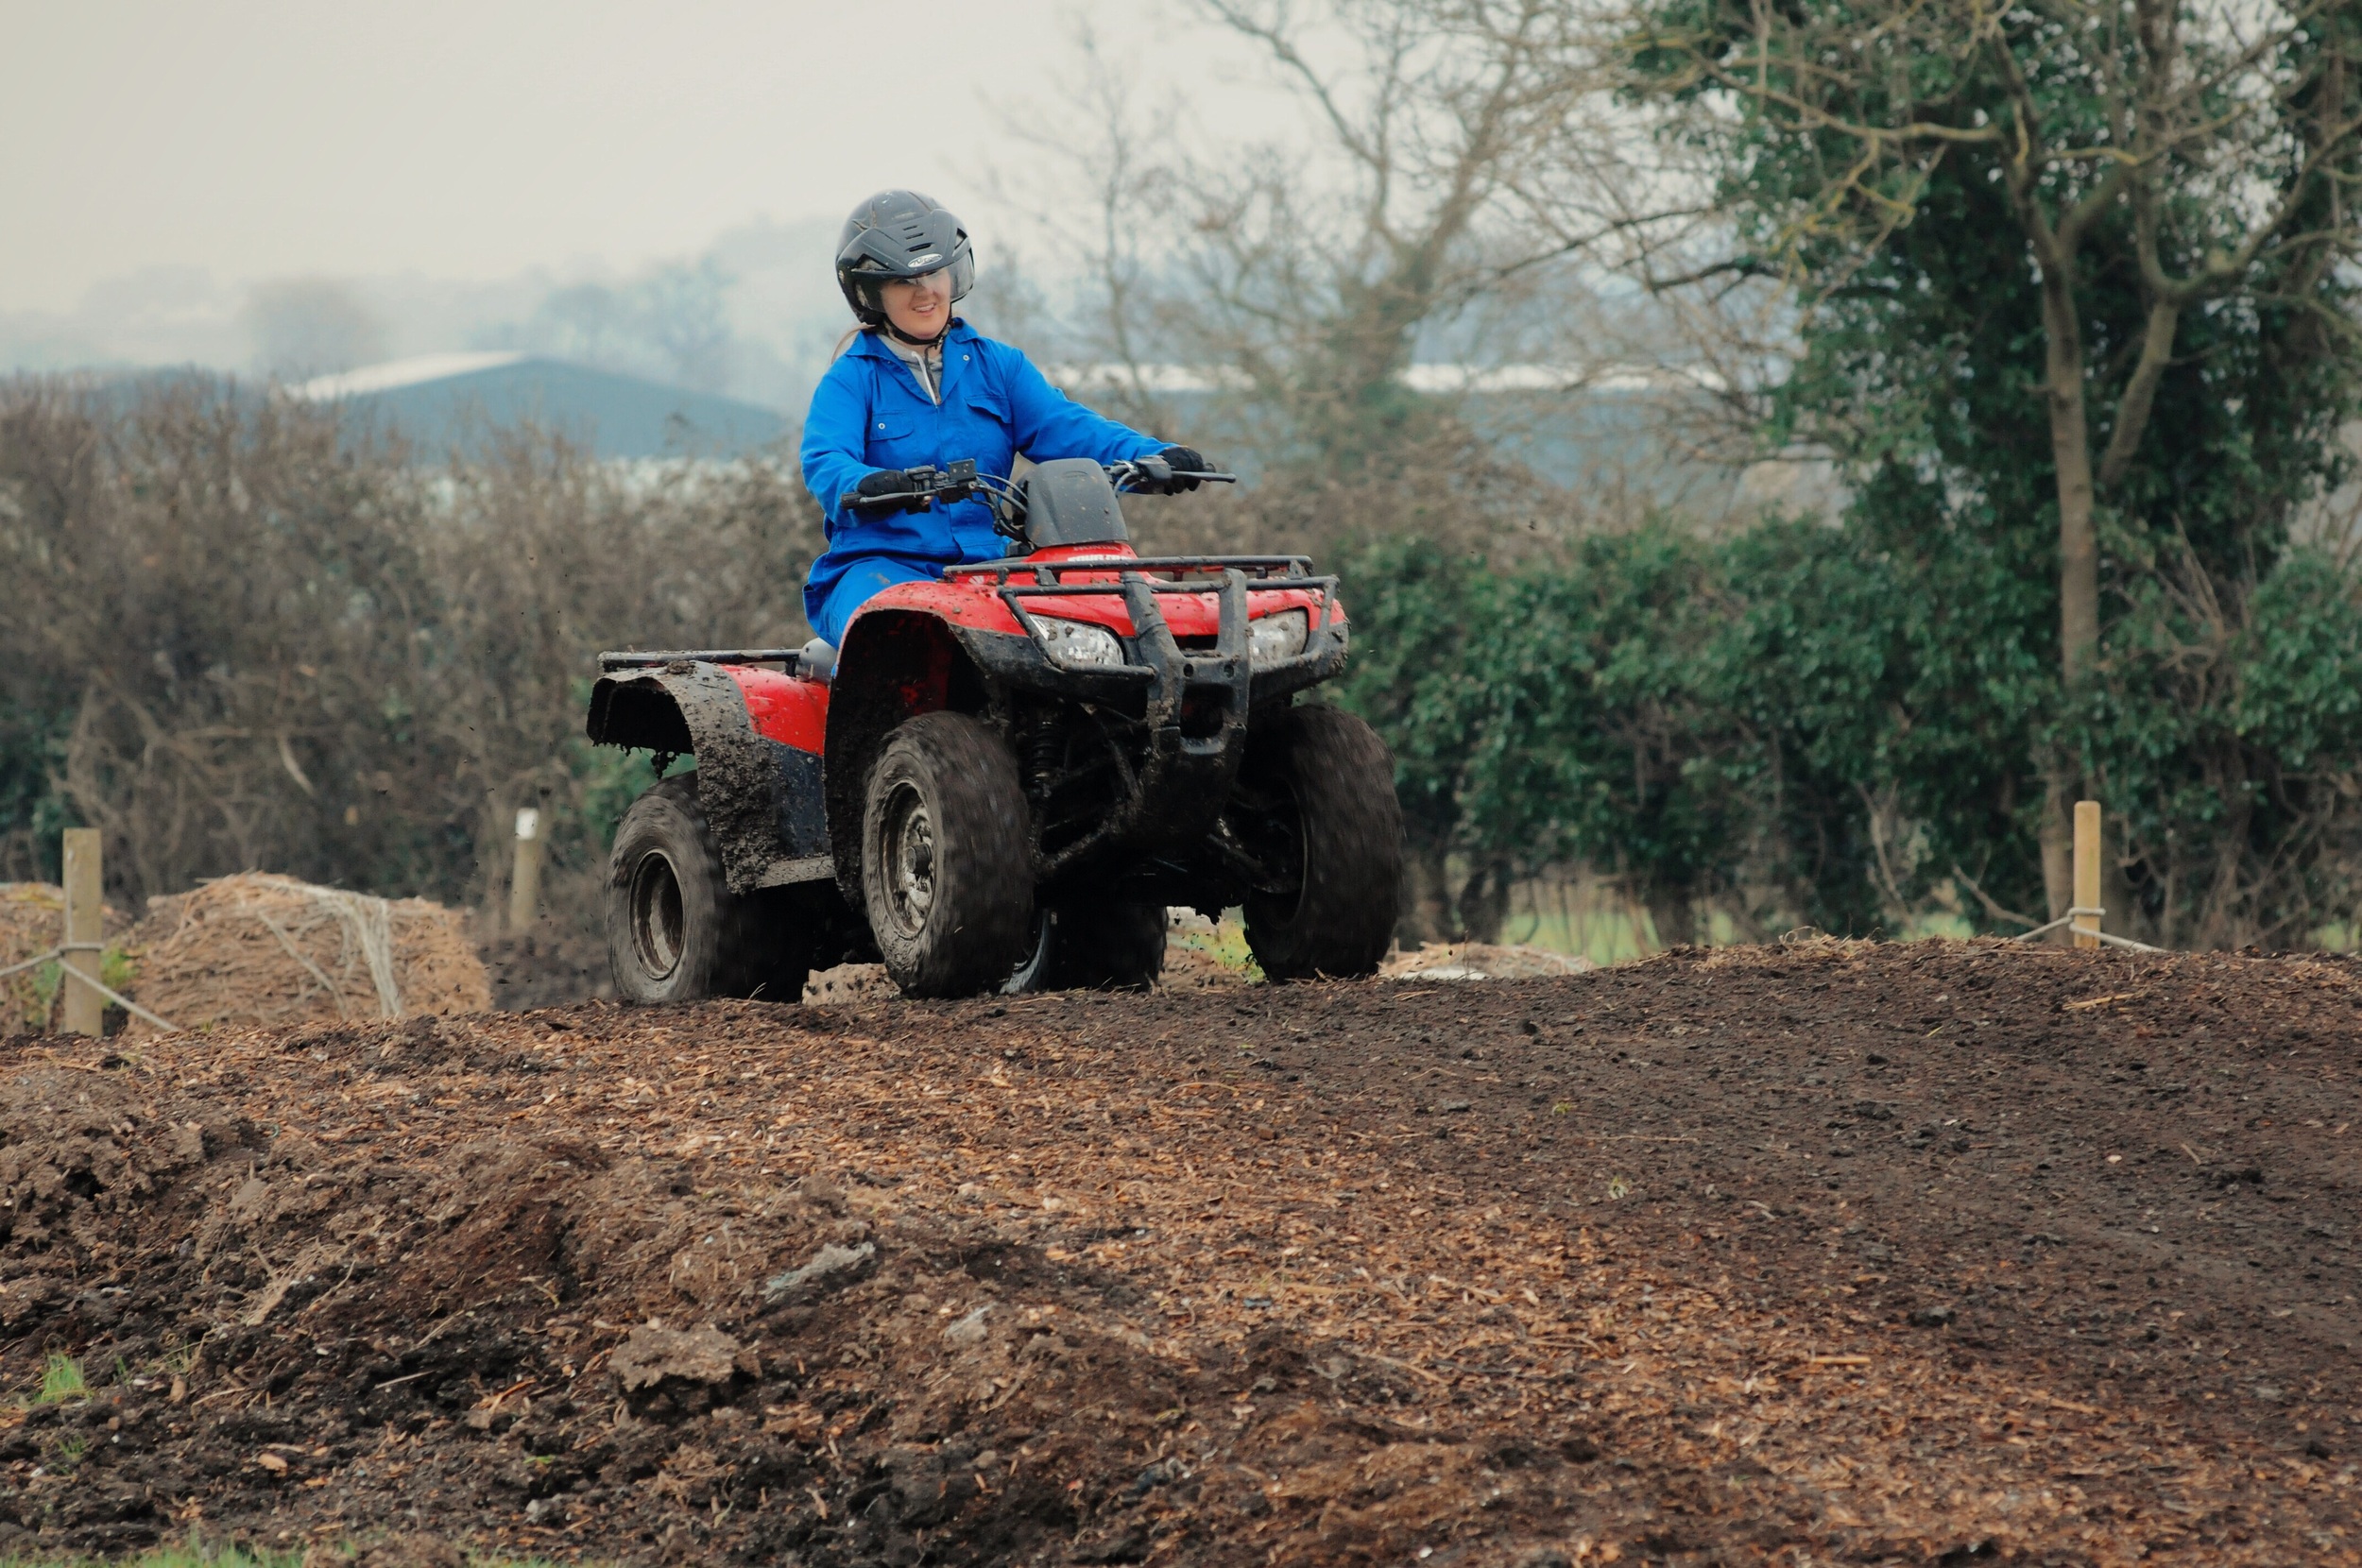 Quad Bike day out at Tile Farm Off Road